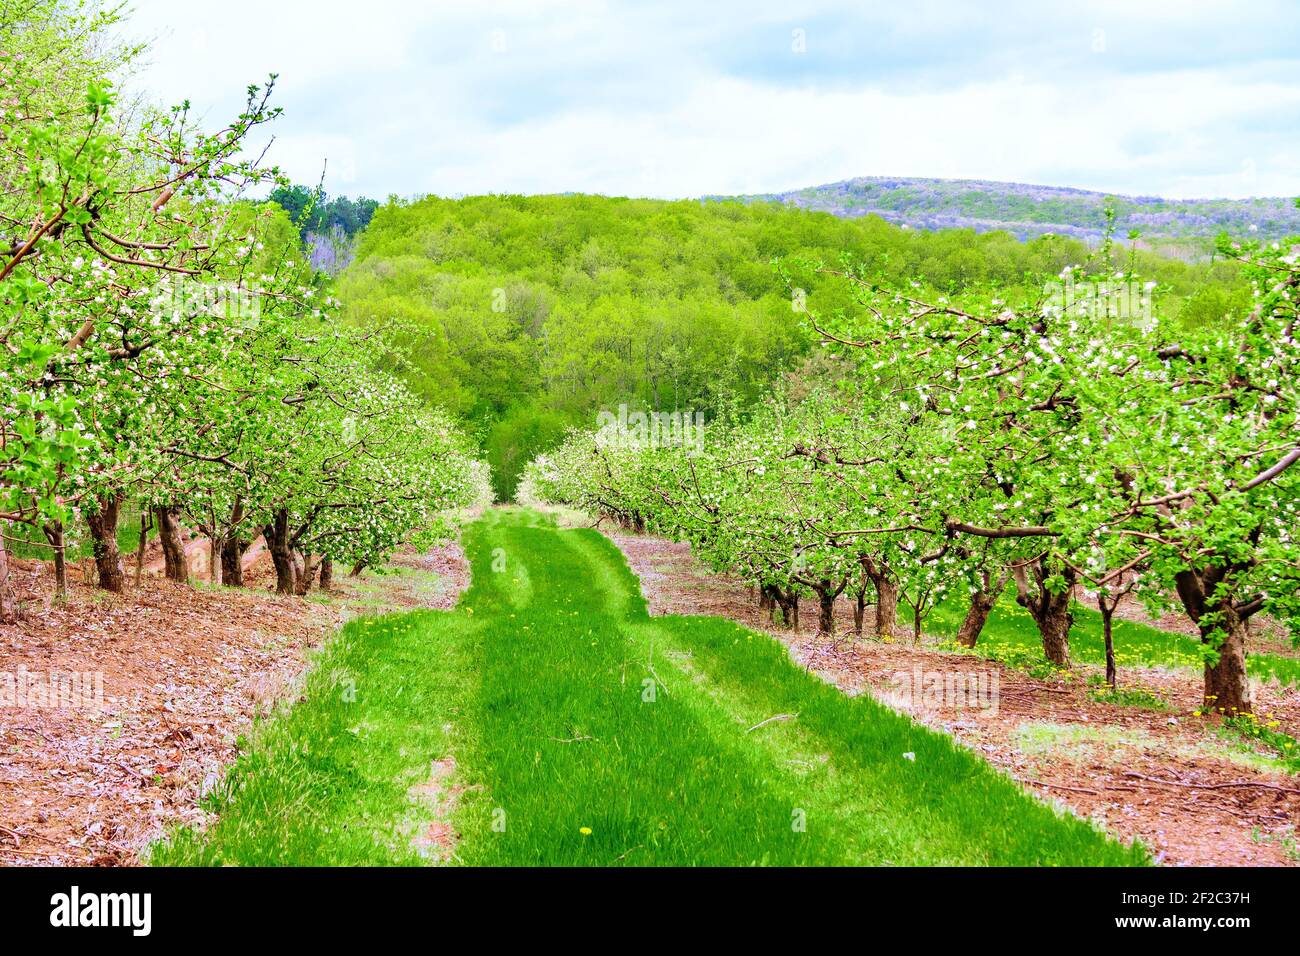 Flowering trees in the Apple orchard located on the hillside Stock Photo